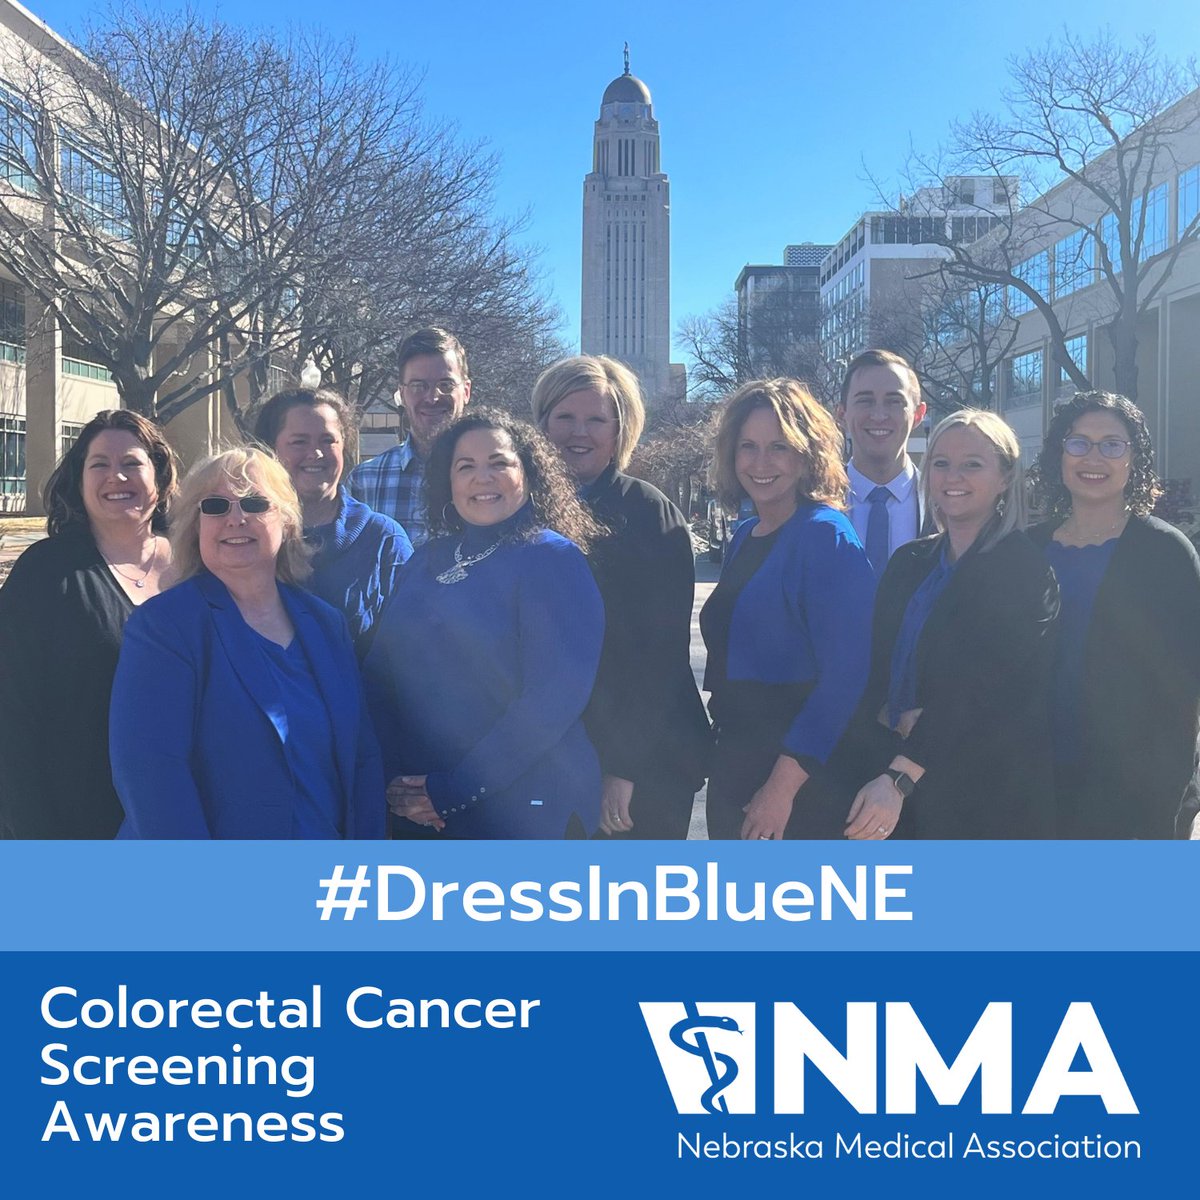 Even though it is one of the most preventable cancers, colorectal cancer is the second leading cause of cancer deaths in men and women combined in Nebraska. Learn more: bit.ly/3DsB51z #FightBackNE #ColorectalCancerAwareness #ColorectalCancer#dressInBlueNE